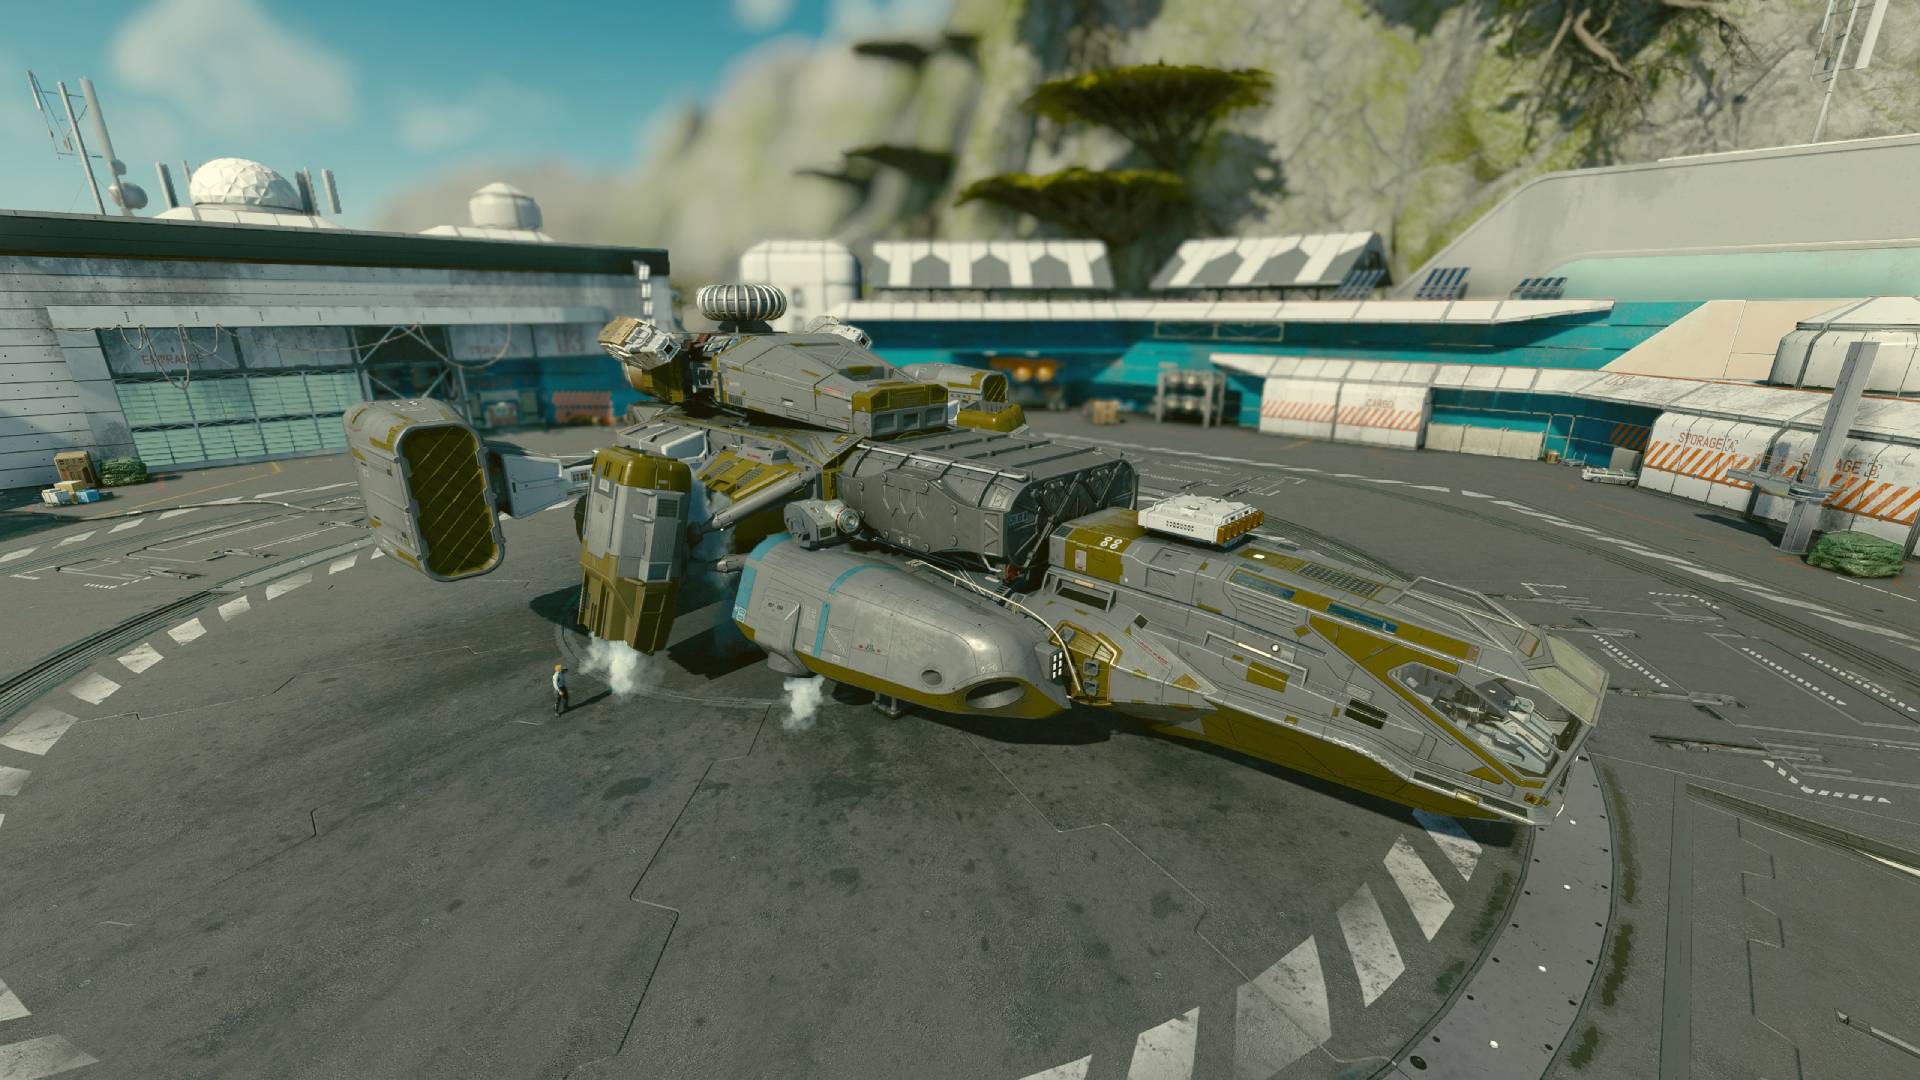 The Narwhal sits parked at the spaceport in New Atlantis so Starfield citizens can admire one of the best ships.